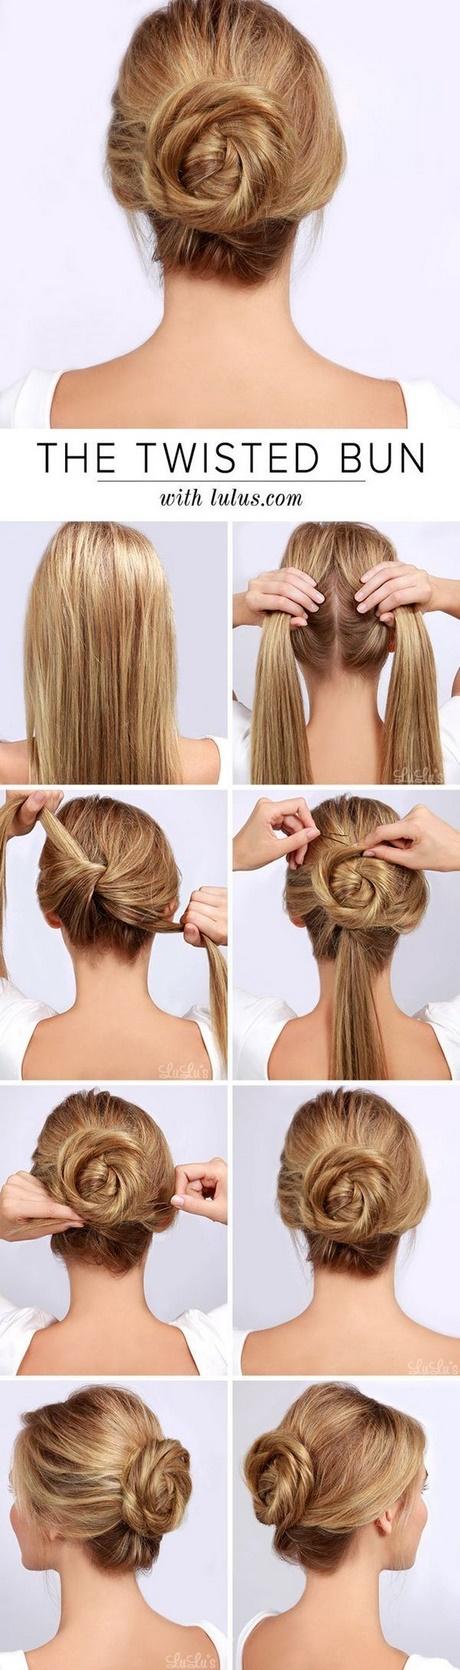 Easy hairstyles for daily use easy-hairstyles-for-daily-use-46_16